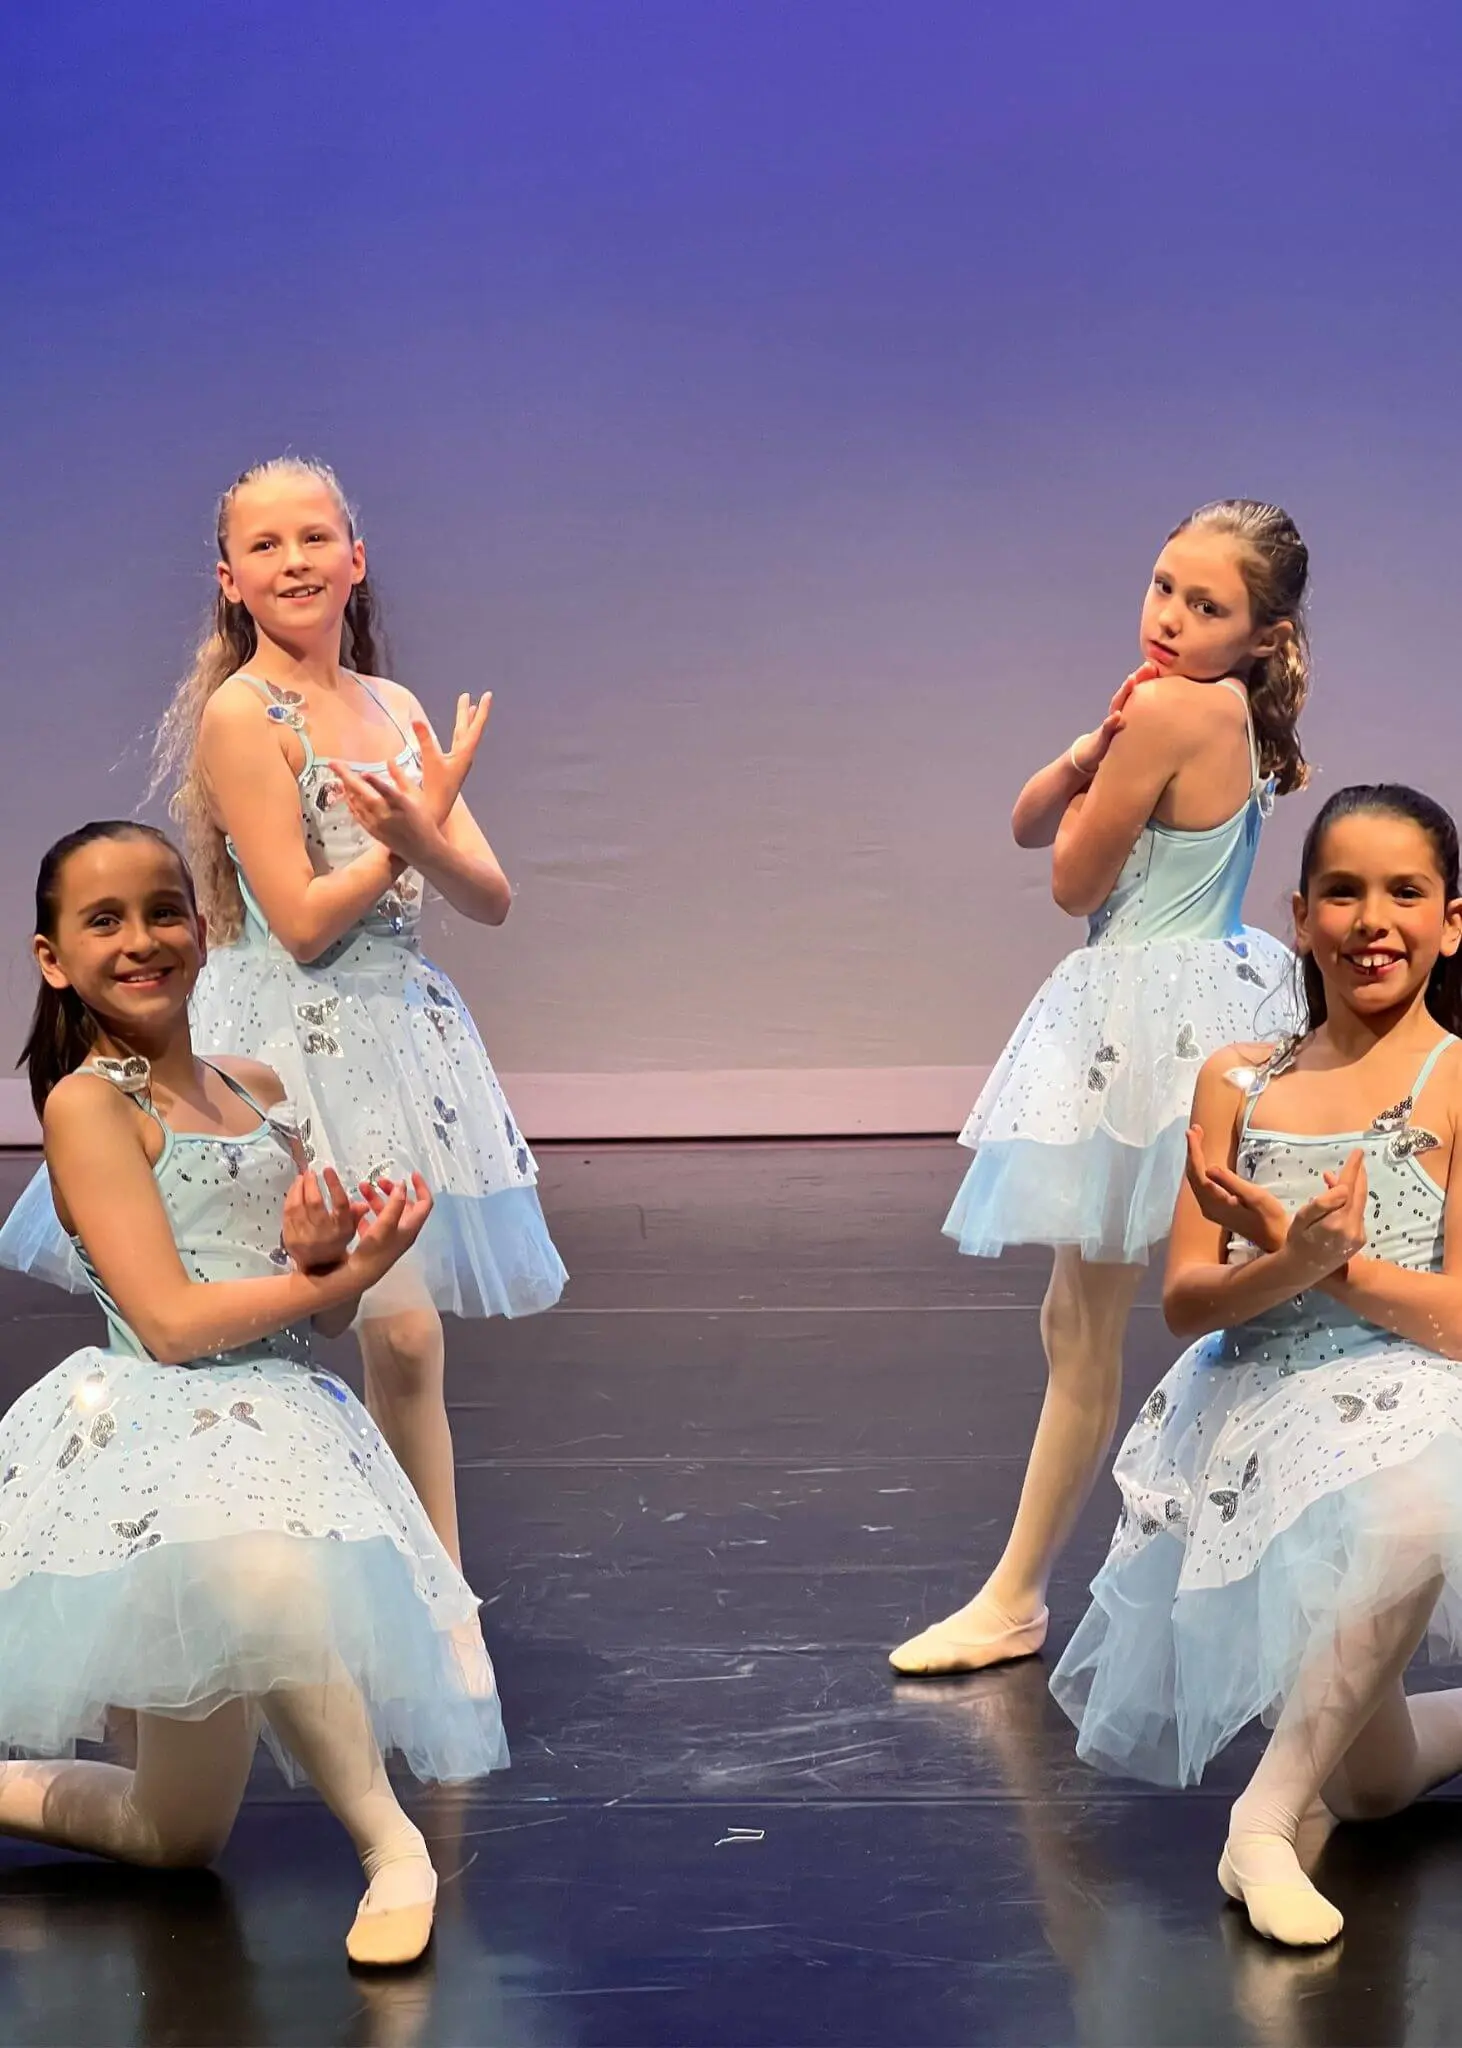 Prep pupils doing a ballet performance at Ibstock Place School, a private school near Richmond, Barnes, Putney, Kingston, and Wandsworth on an overseas trip. 